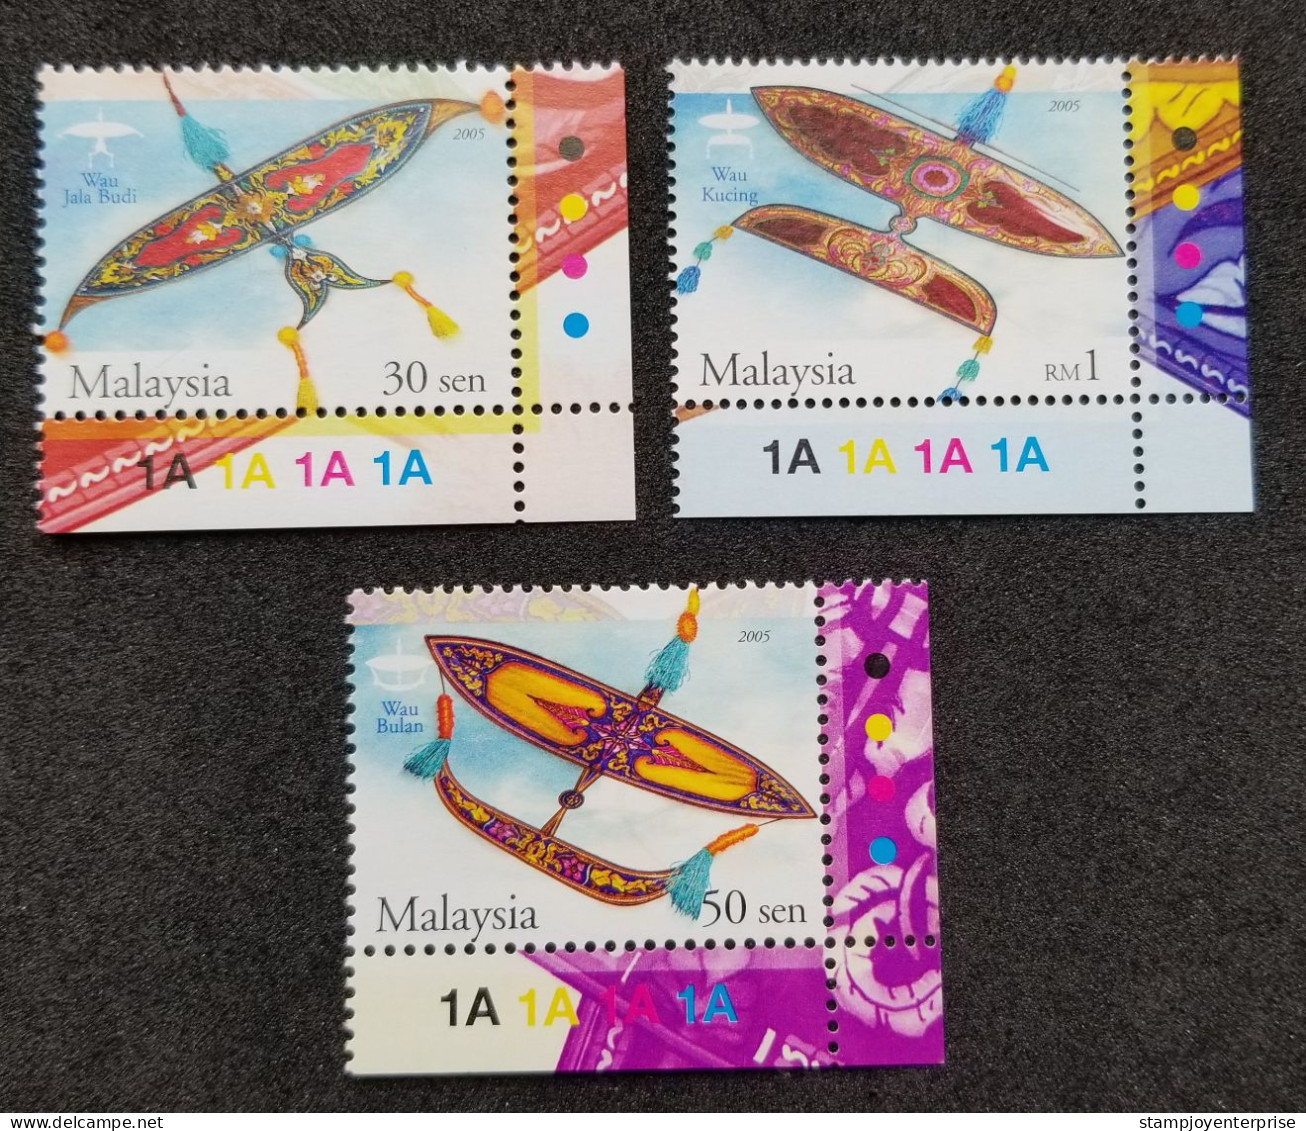 Malaysia Traditional Kites 2005 Kite Art Culture Games (stamp Color) MNH - Malaysia (1964-...)